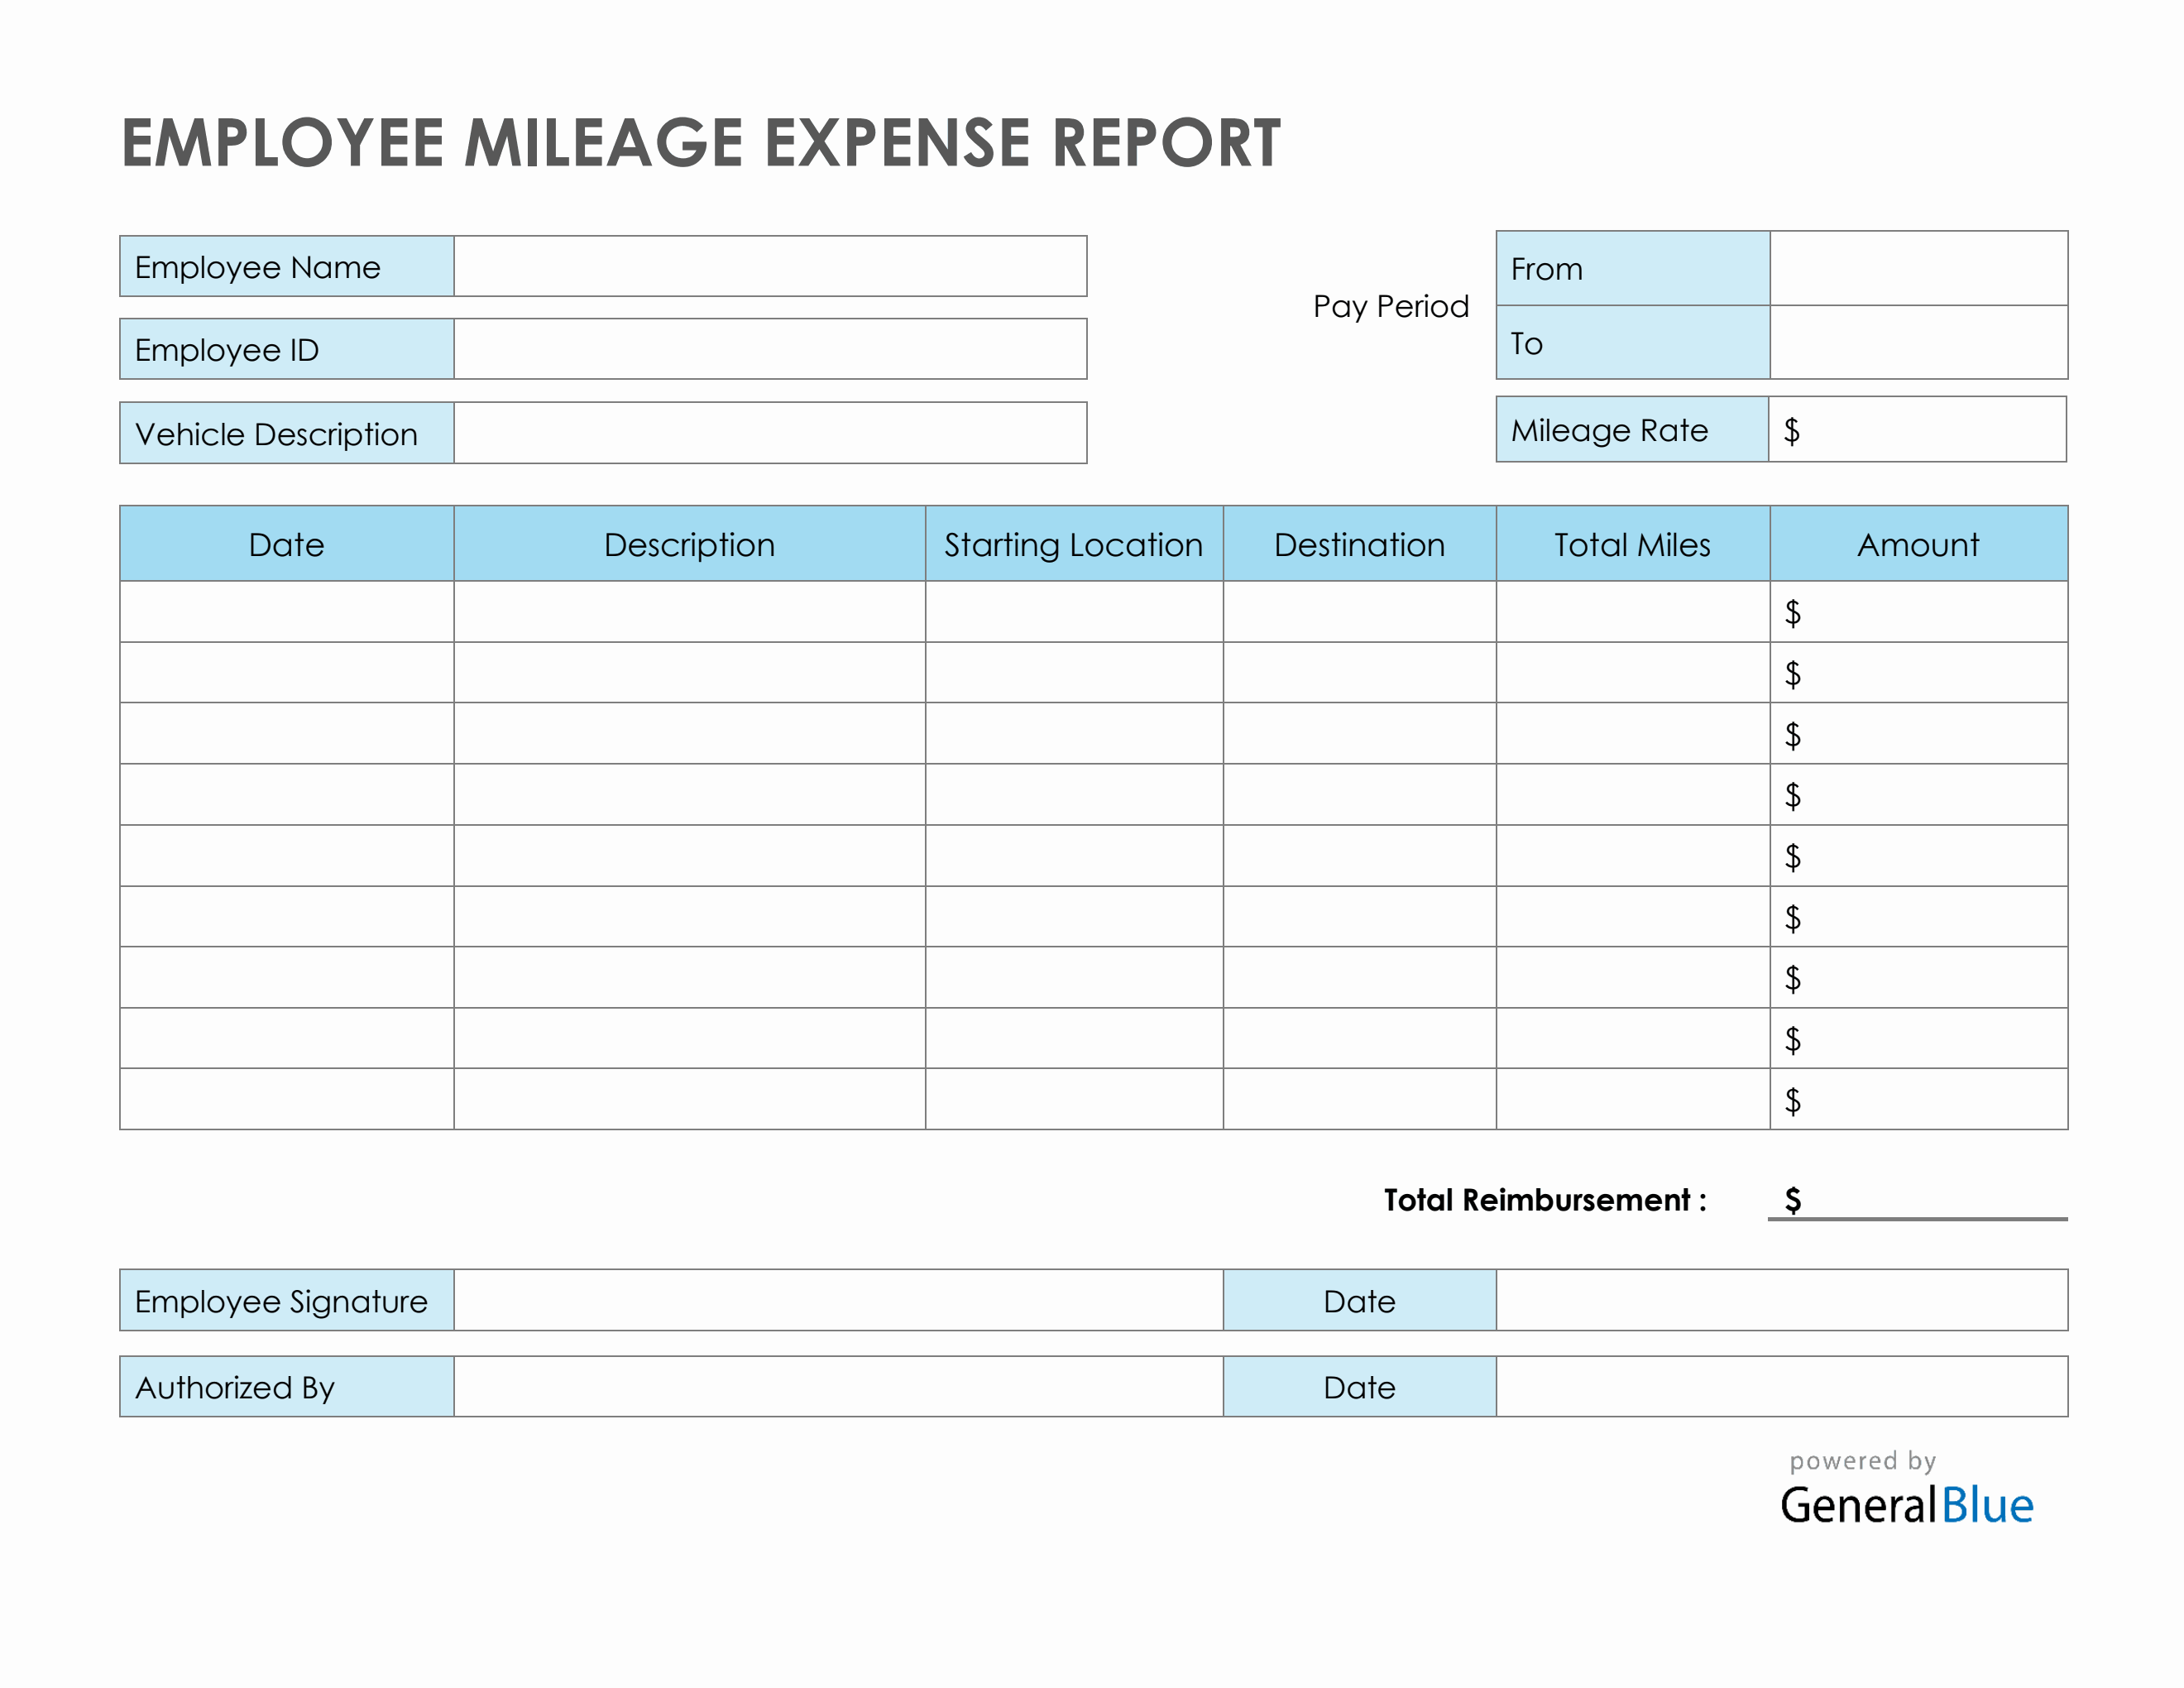 Employee Mileage Expense Report Template in Word Regarding Mileage Report Template